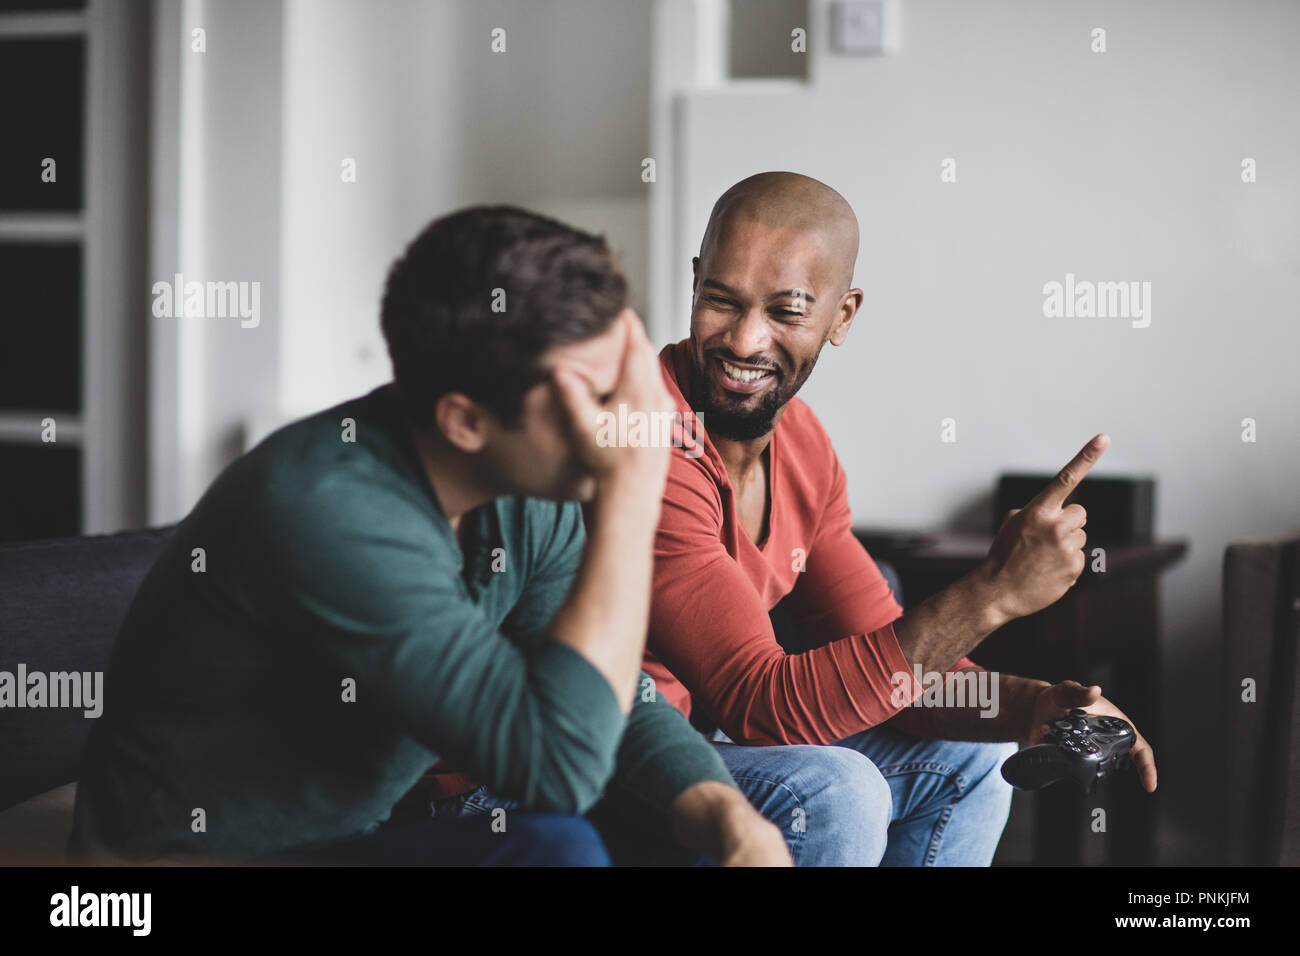 Male friends playing on a games console Stock Photo